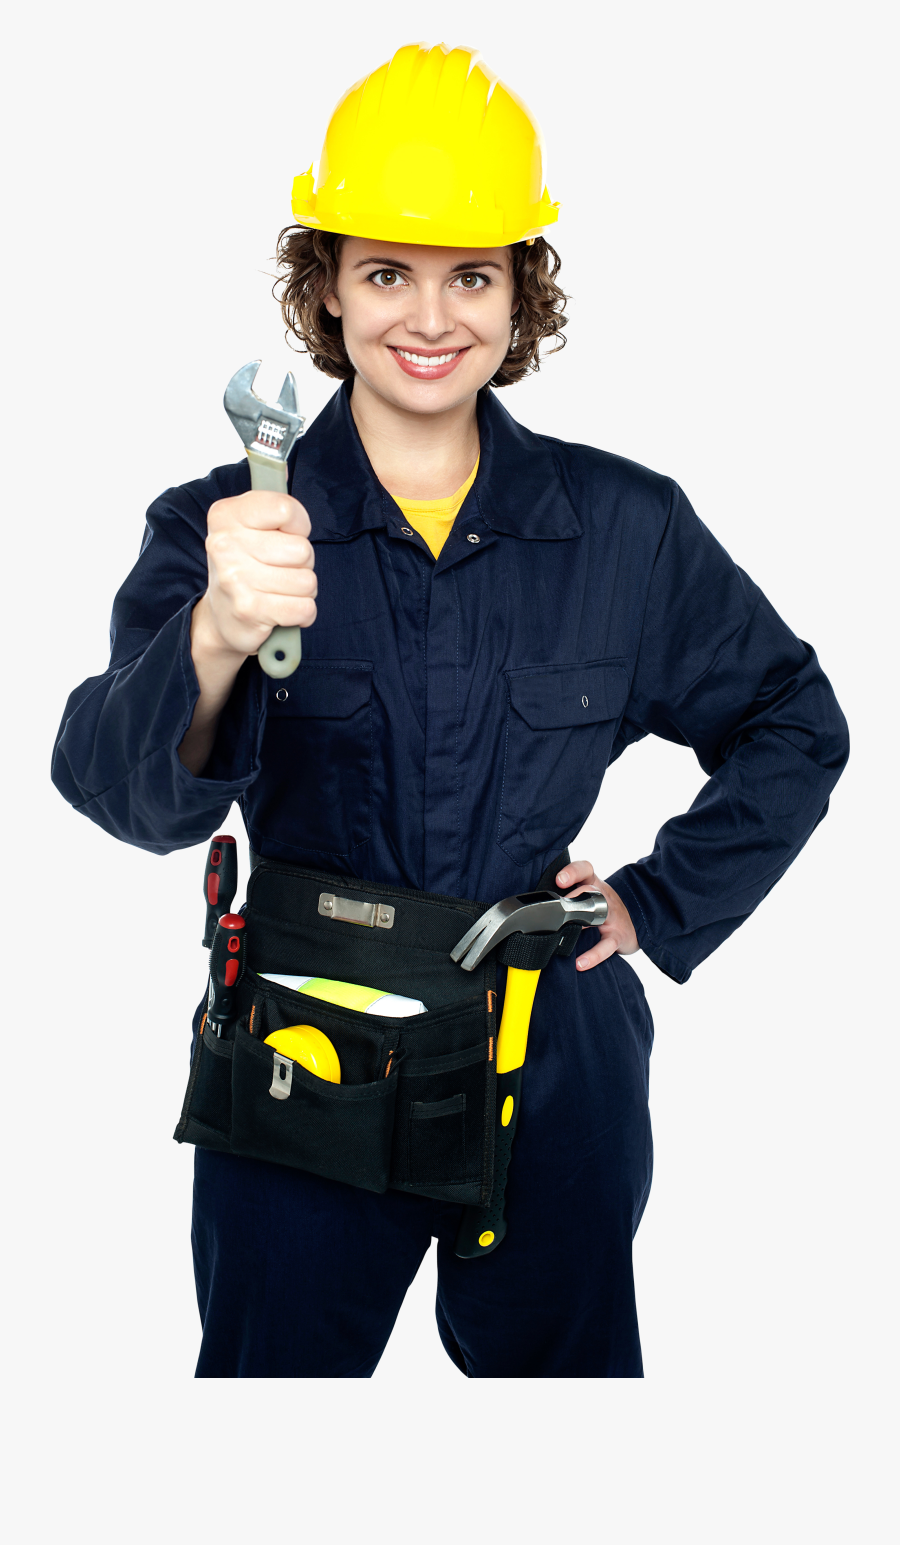 Women Worker Png Image - Female Construction Worker Png, Transparent Clipart